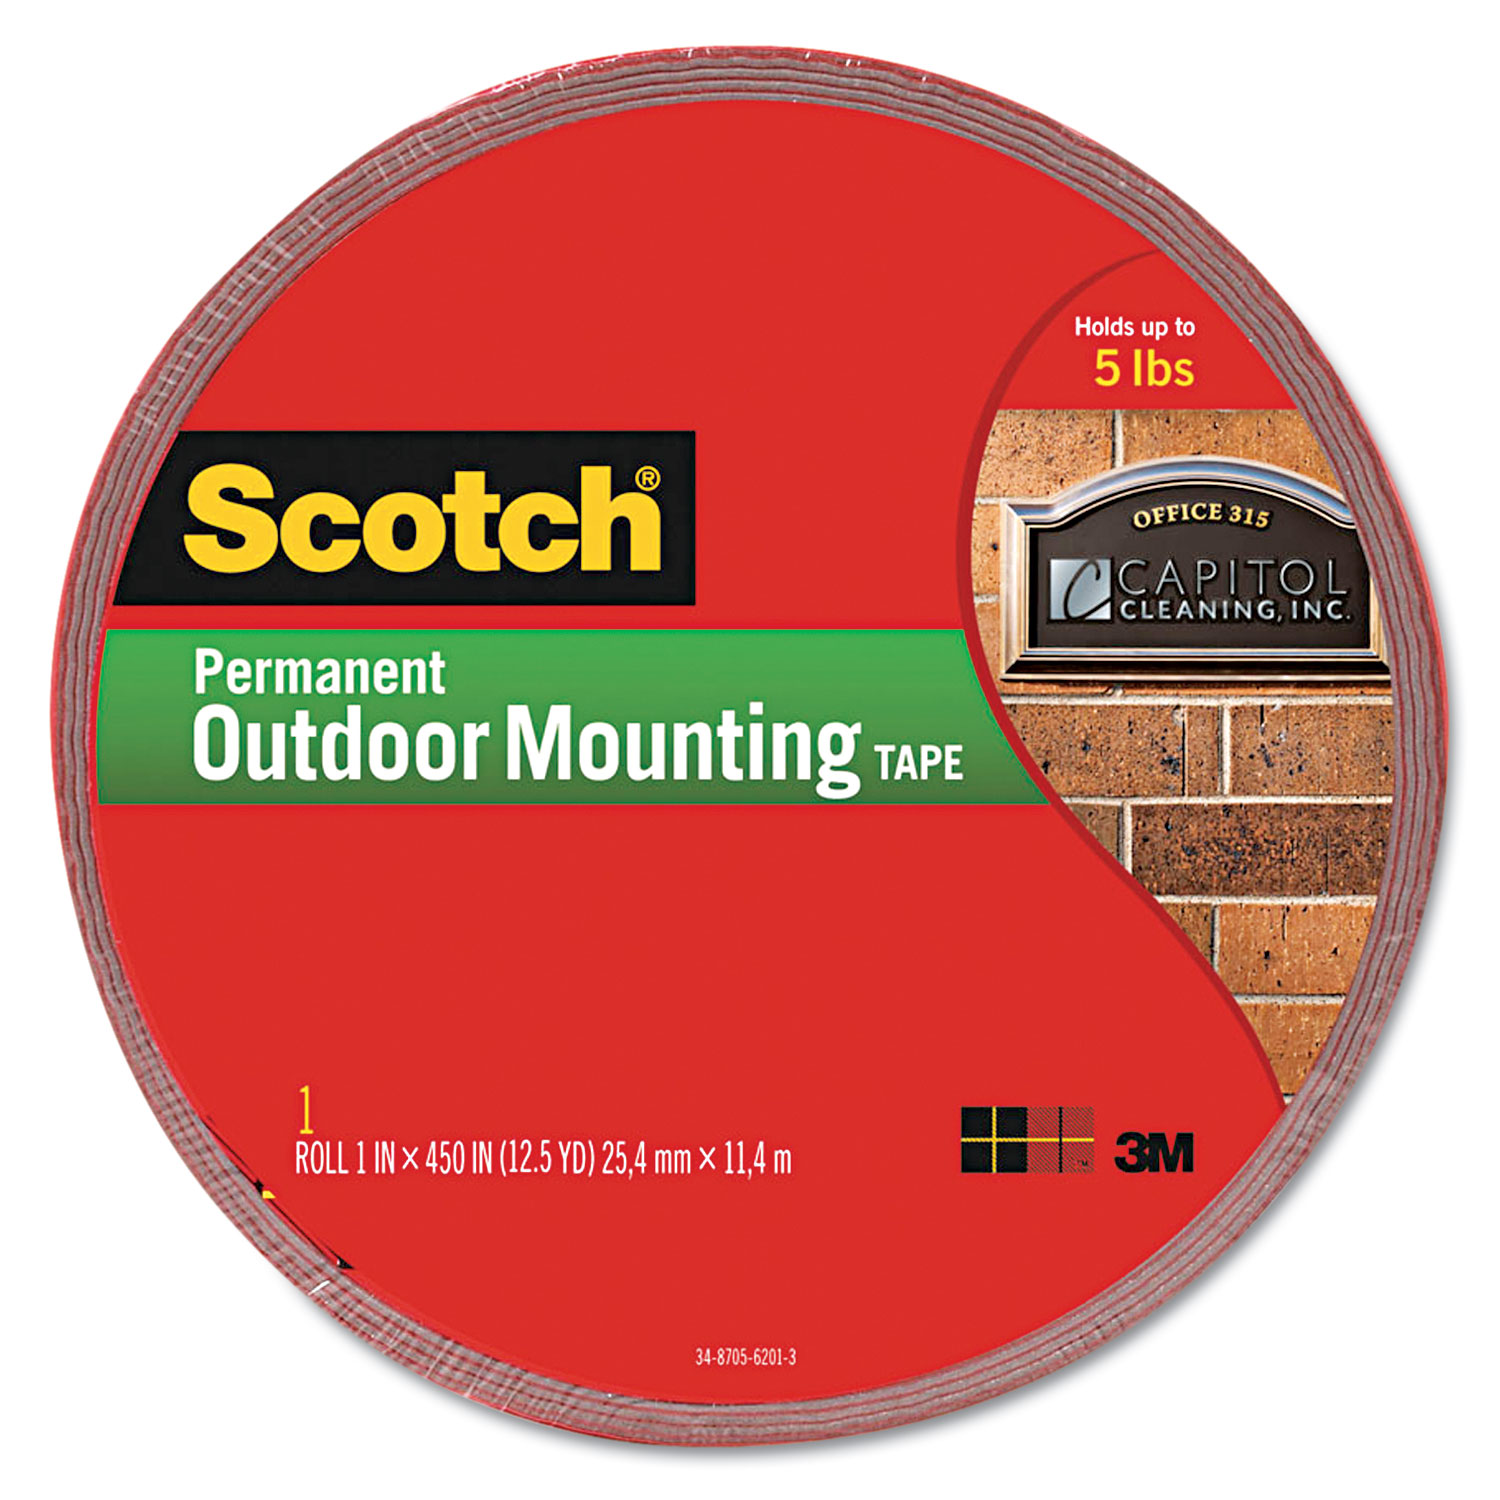  Scotch 4011-LONG Exterior Weather-Resistant Double-Sided Tape, 1 x 450, Gray (MMM4011LONG) 